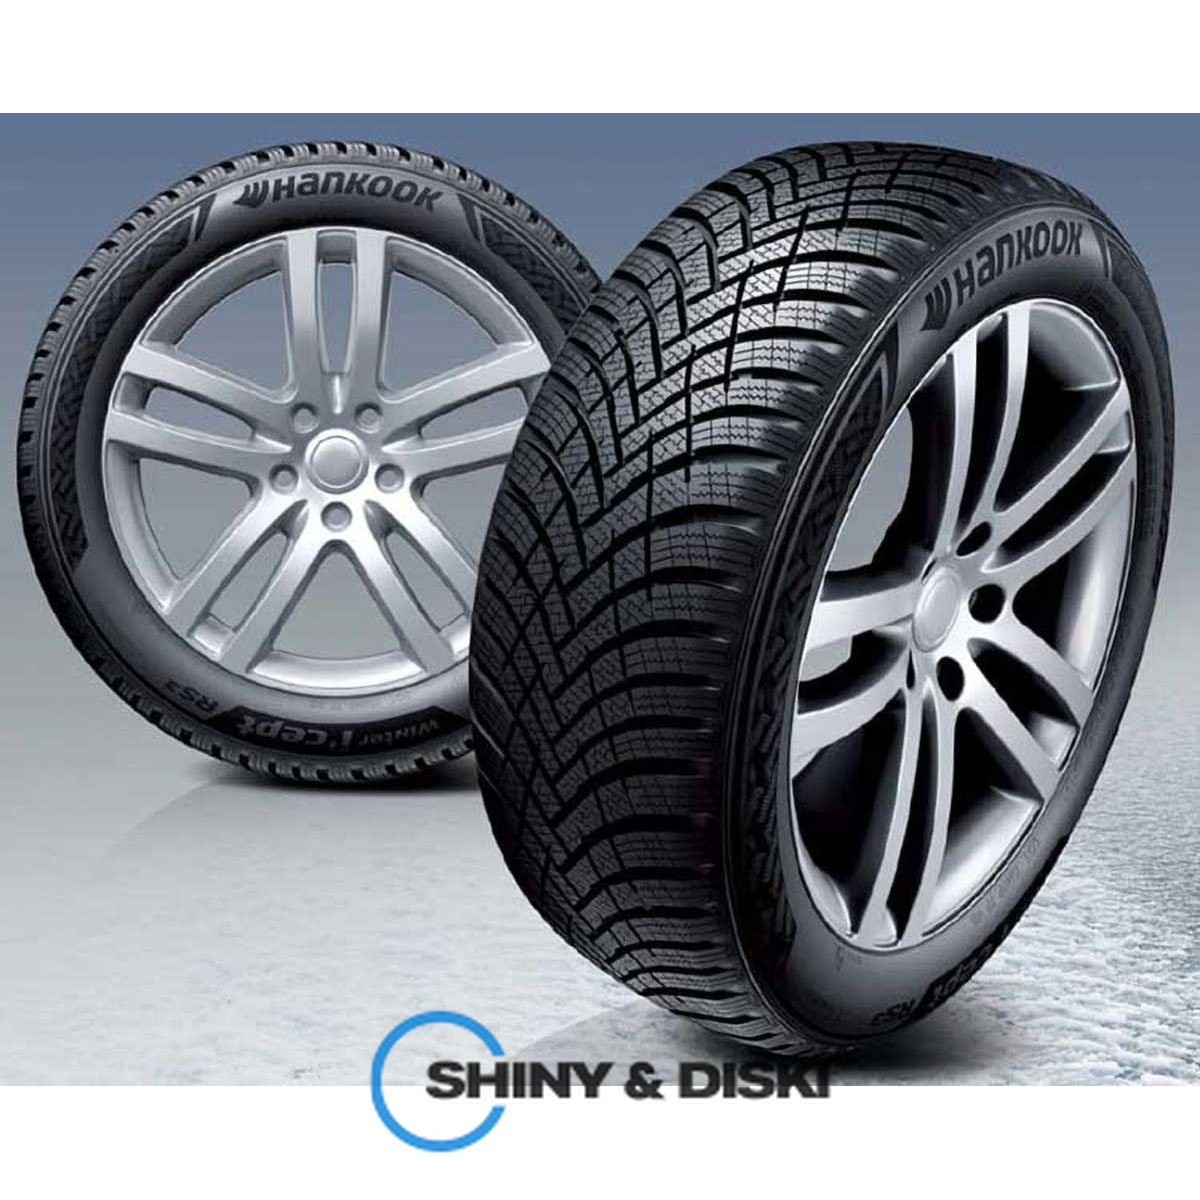 покрышки hankook winter i*cept rs3 w462 225/55 r16 99h xl